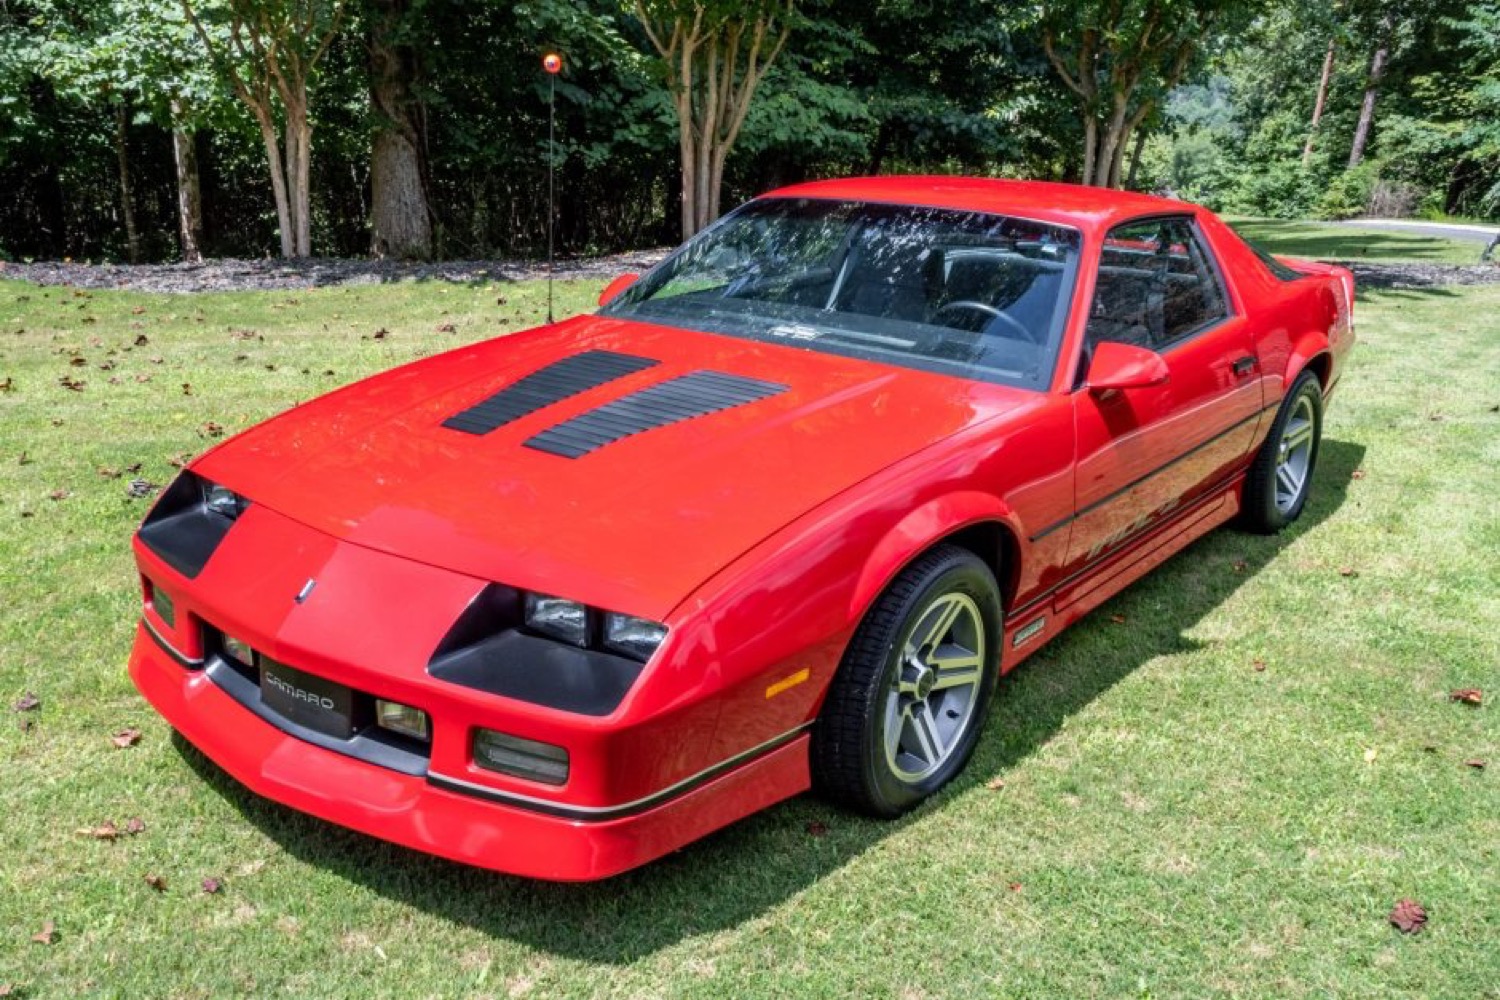 Chevy Camaro Z28 IROC-Z With Less Than 2K Miles Up For Grabs